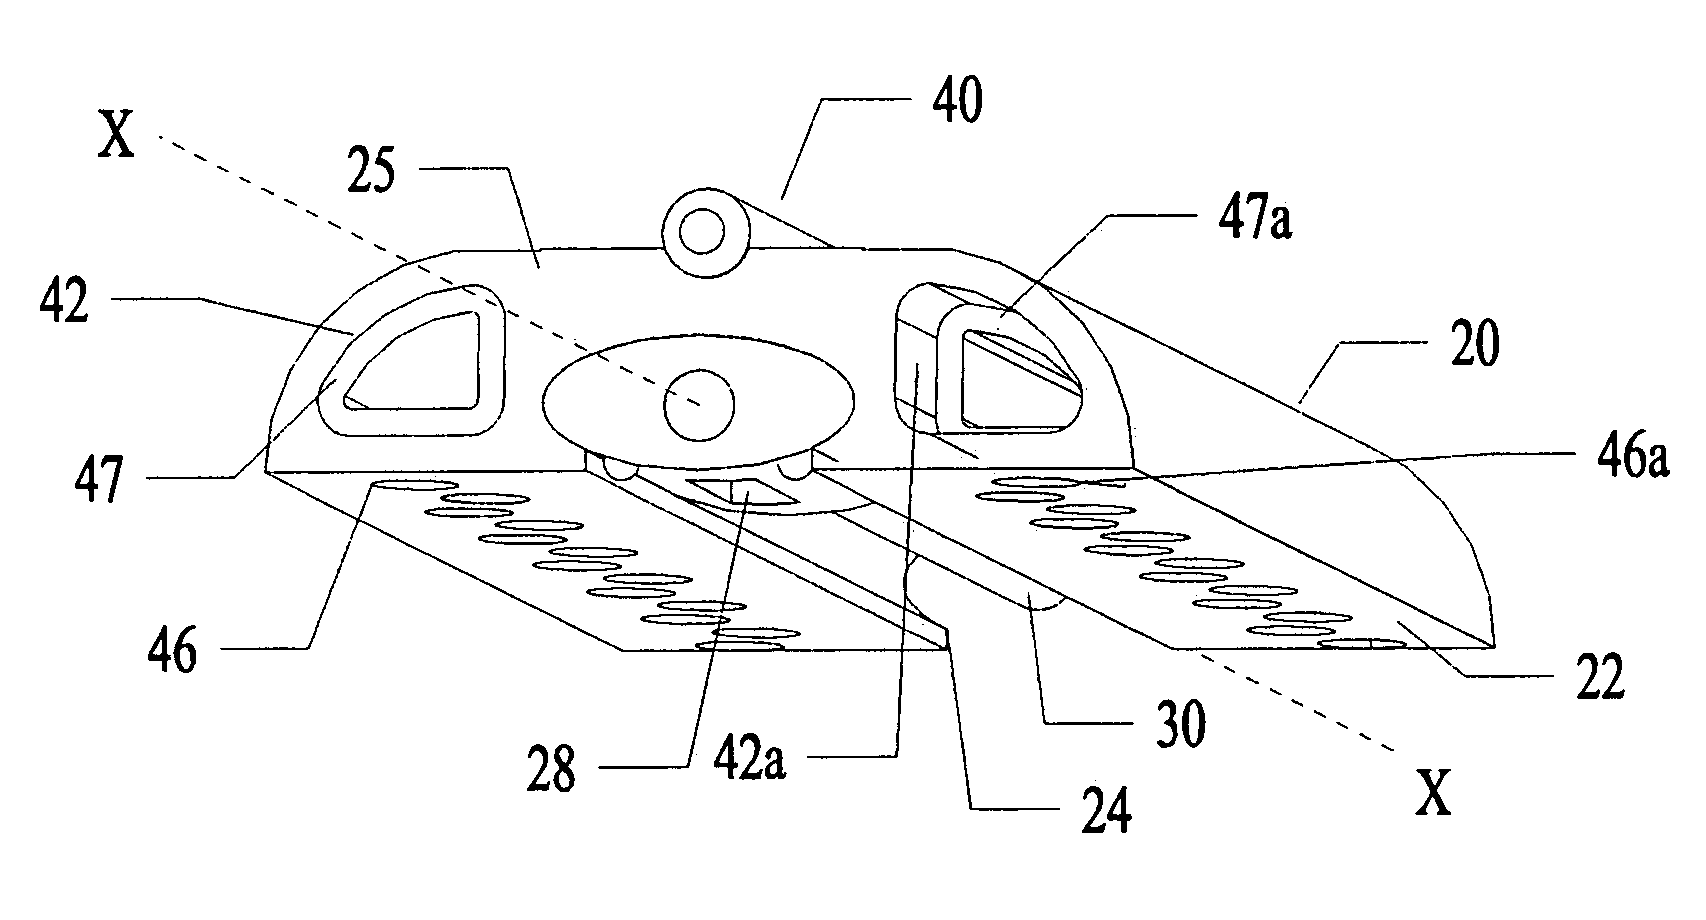 Apparatus and method for guided ablation treatment